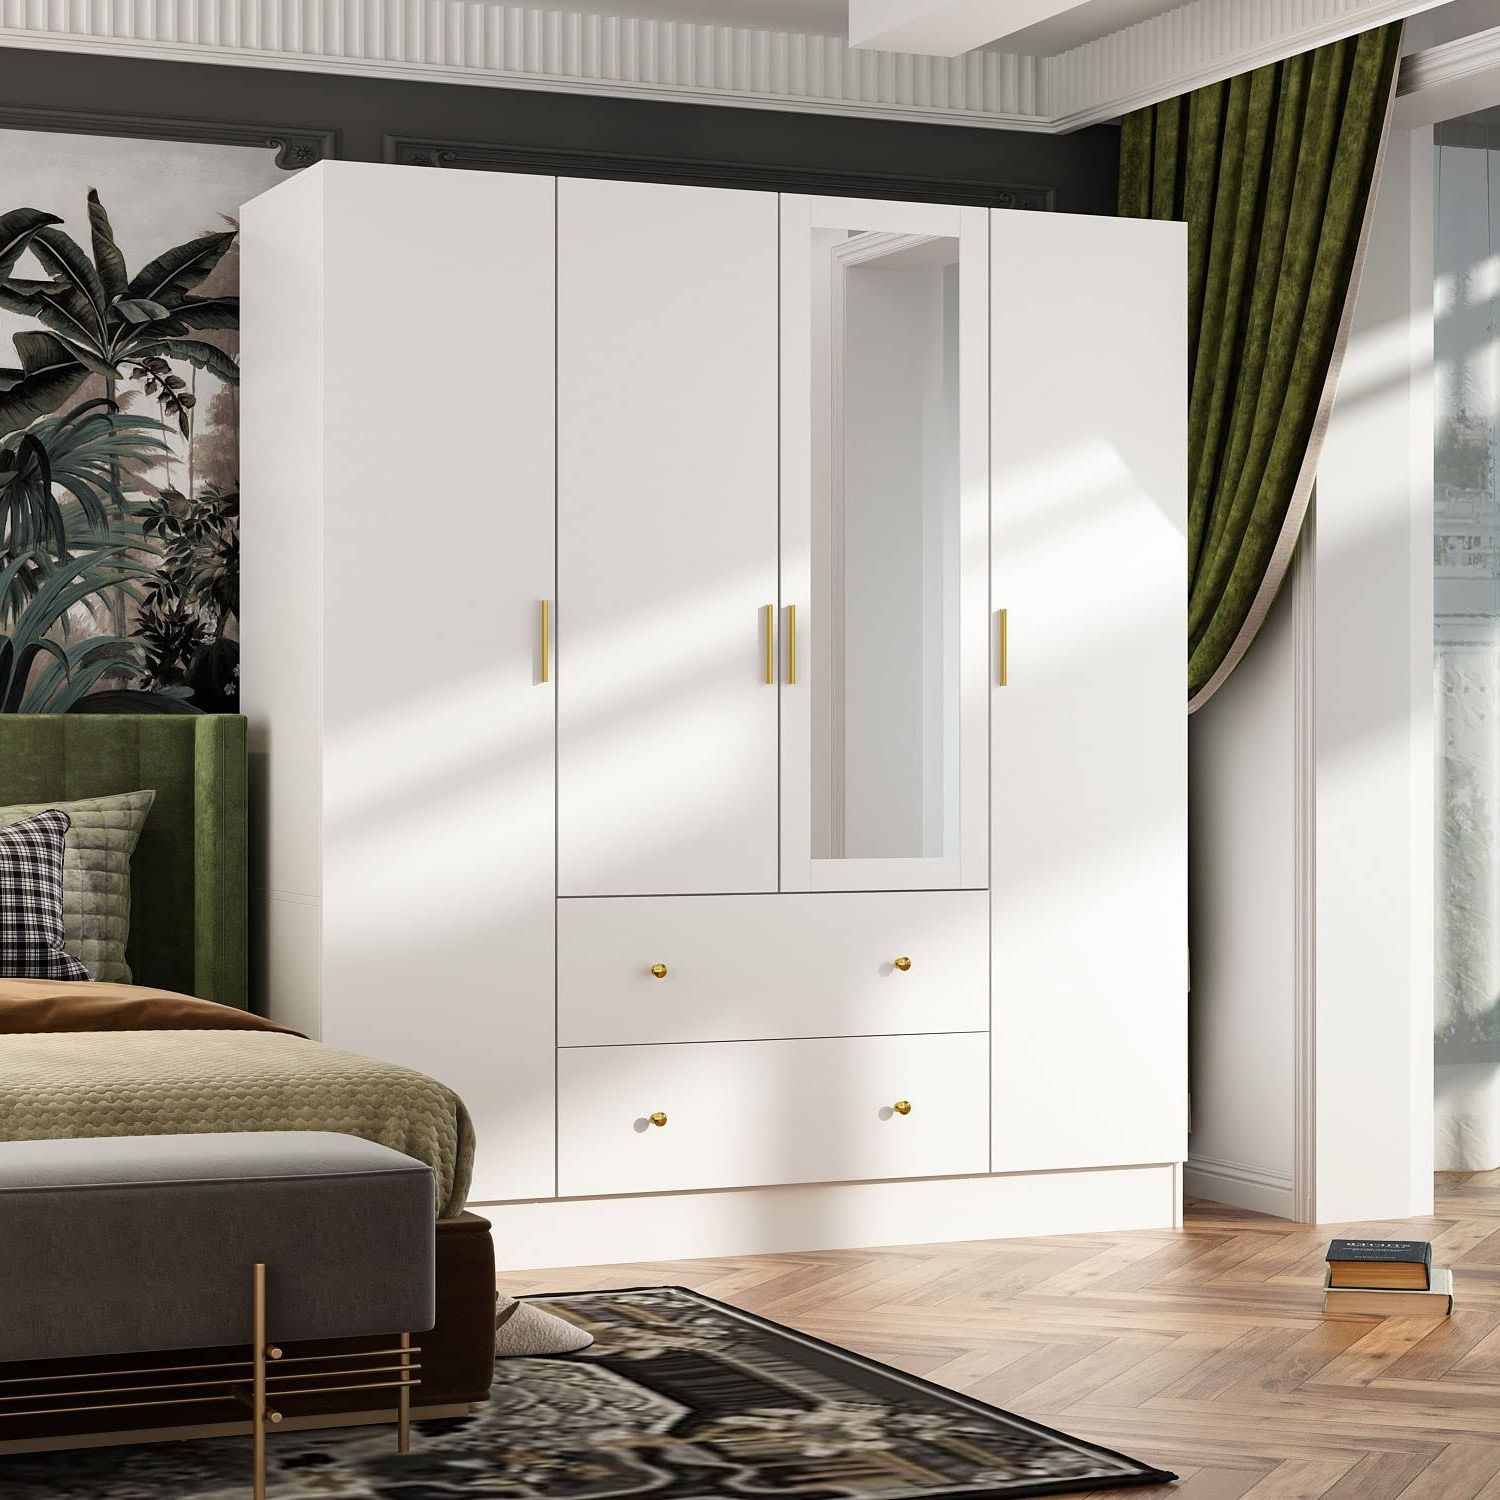 Fashionable Wardrobes With 4 Shelves Intended For Amazon: Famapy 4 Door Wardrobe Closet With Mirror, Armoires And  Wardrobes With Drawers And Shelves, Armoire Wardrobe Closet With Hanging  Rod, Bedroom Armoires White (63”w X 19.7”d X  (View 8 of 10)